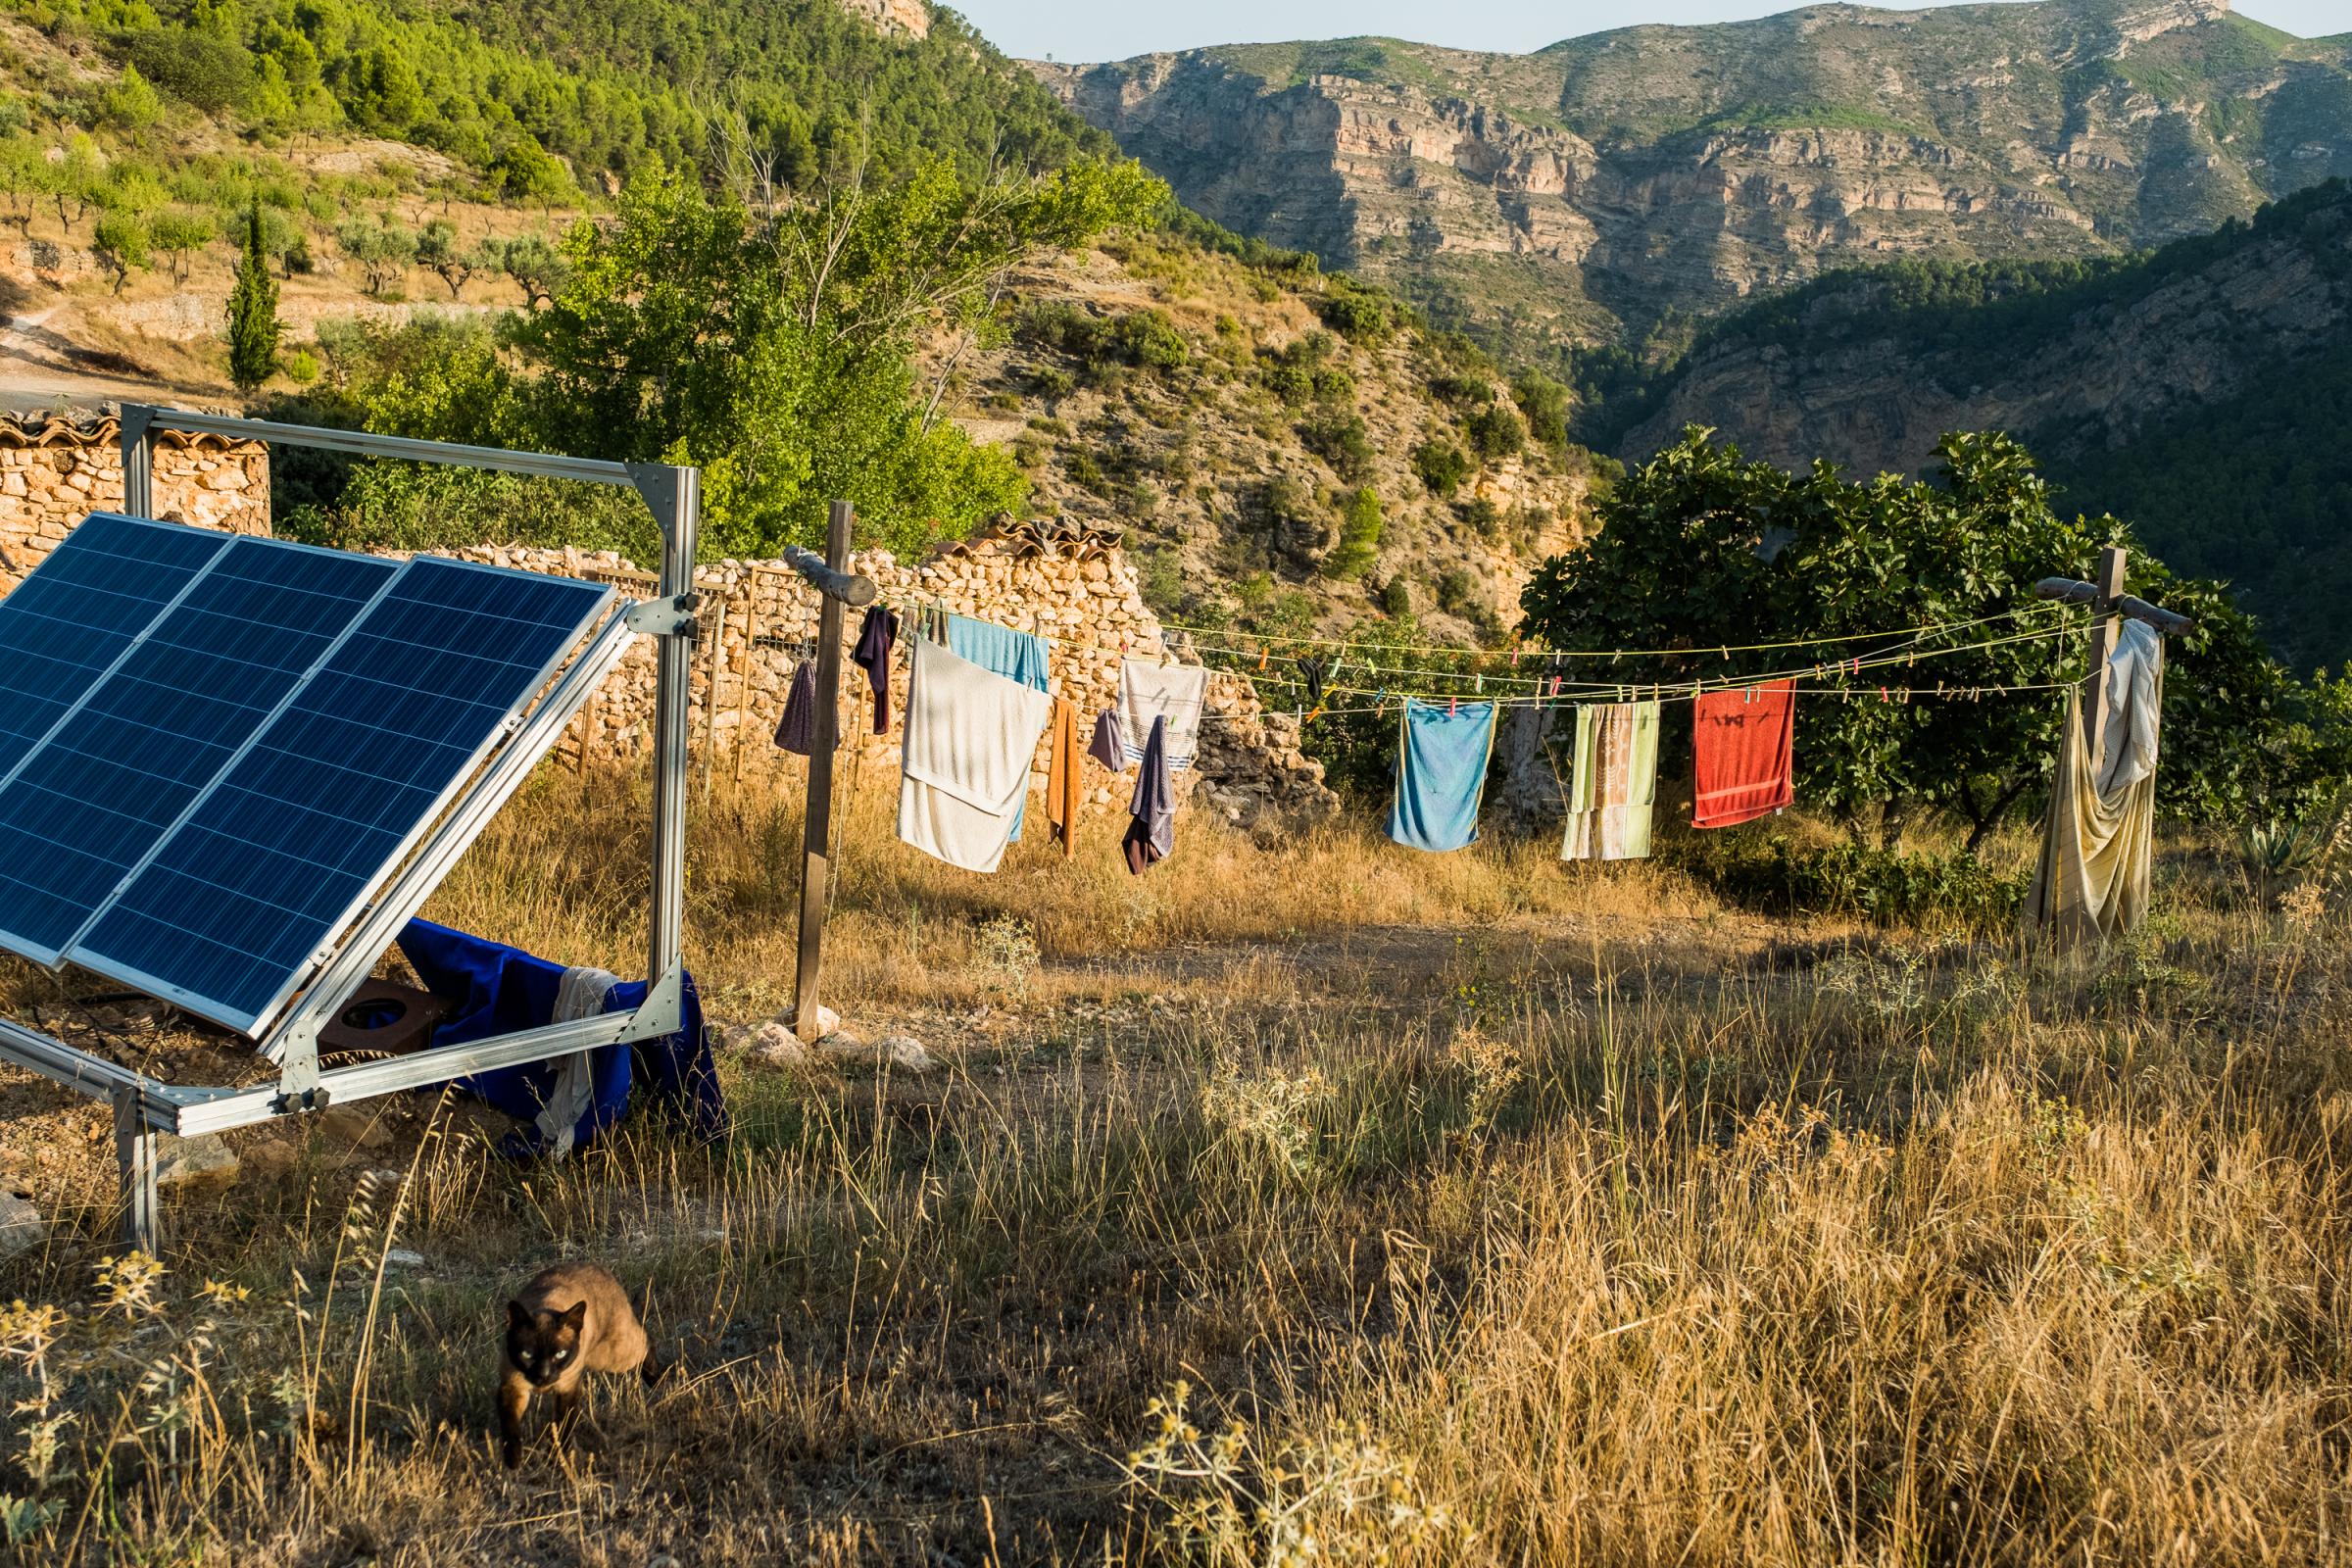 Rutopia - Spain - Wash is drying in the sun, close to the solar panels in...